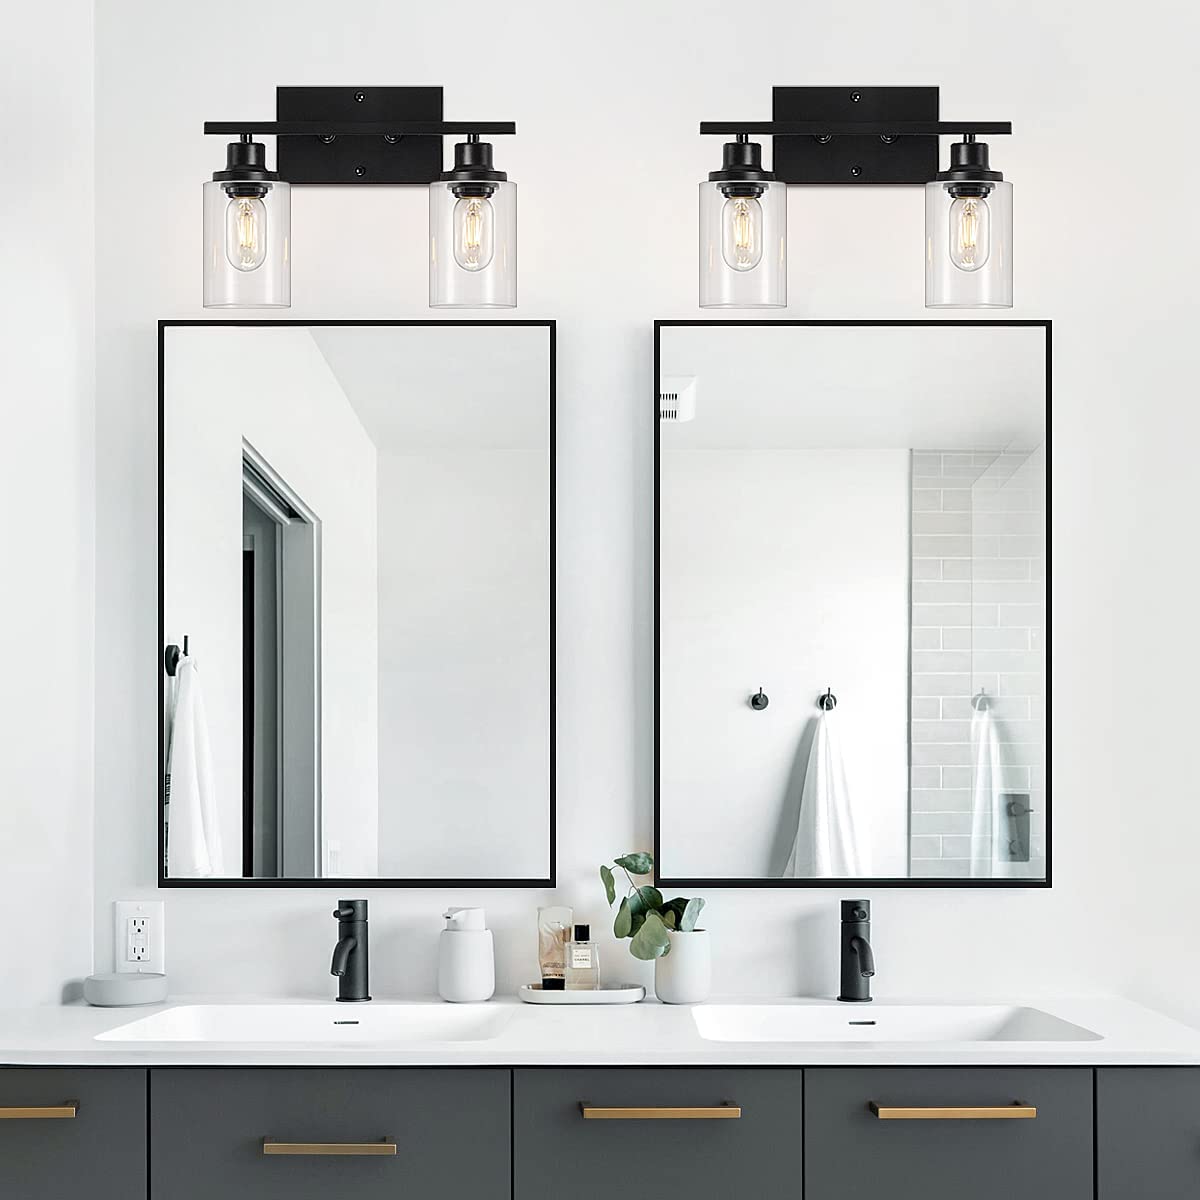 Bathroom Mirrors|Vanity Mirror |Wall Mirrors by Sam Home Collection|22x30inch Large